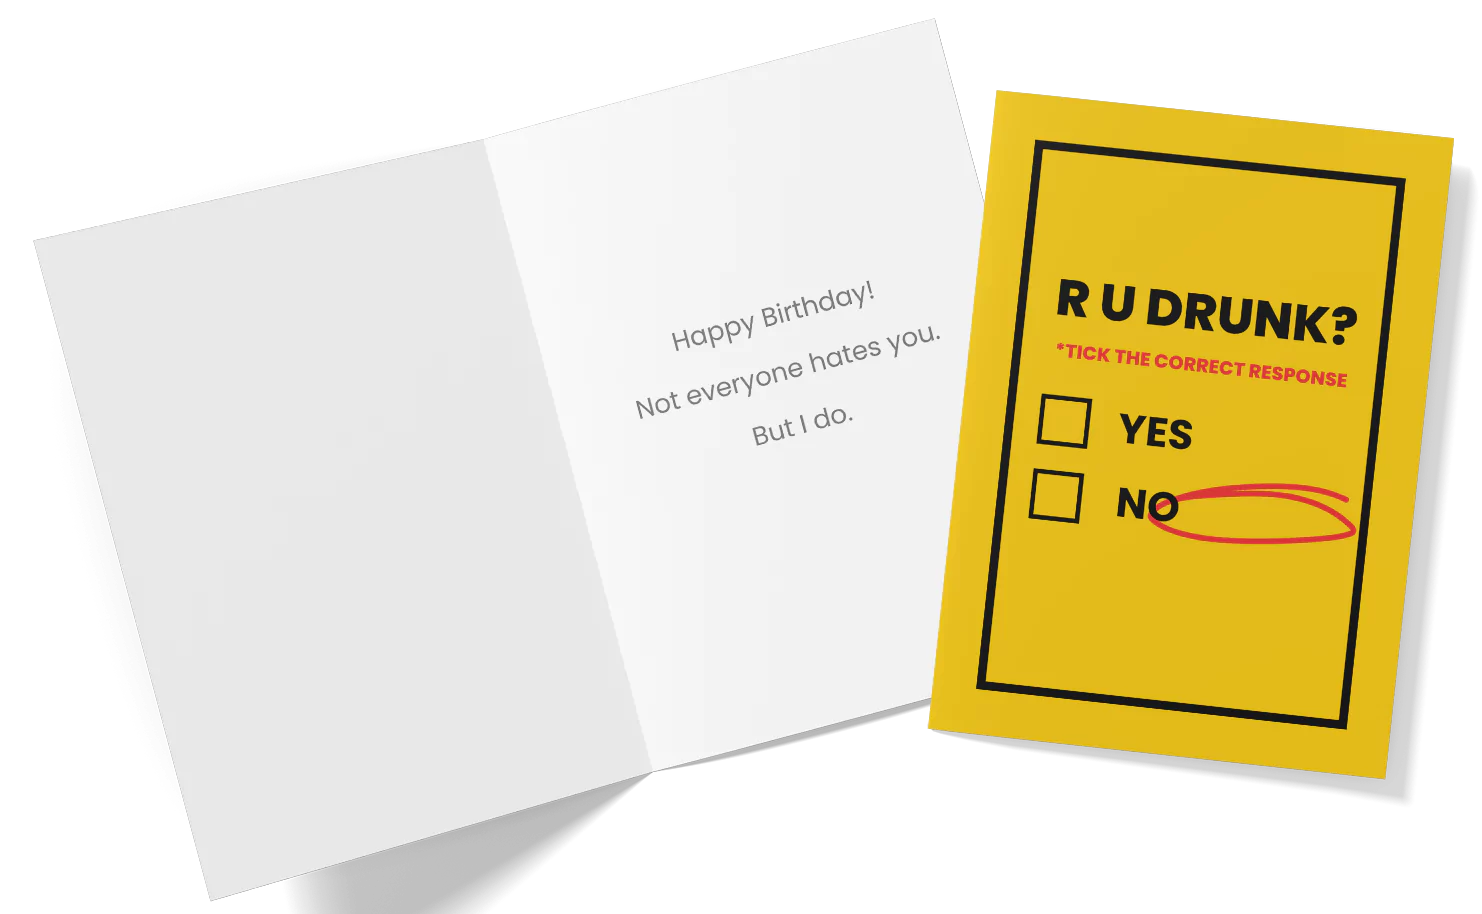 A yellow greeting card with text